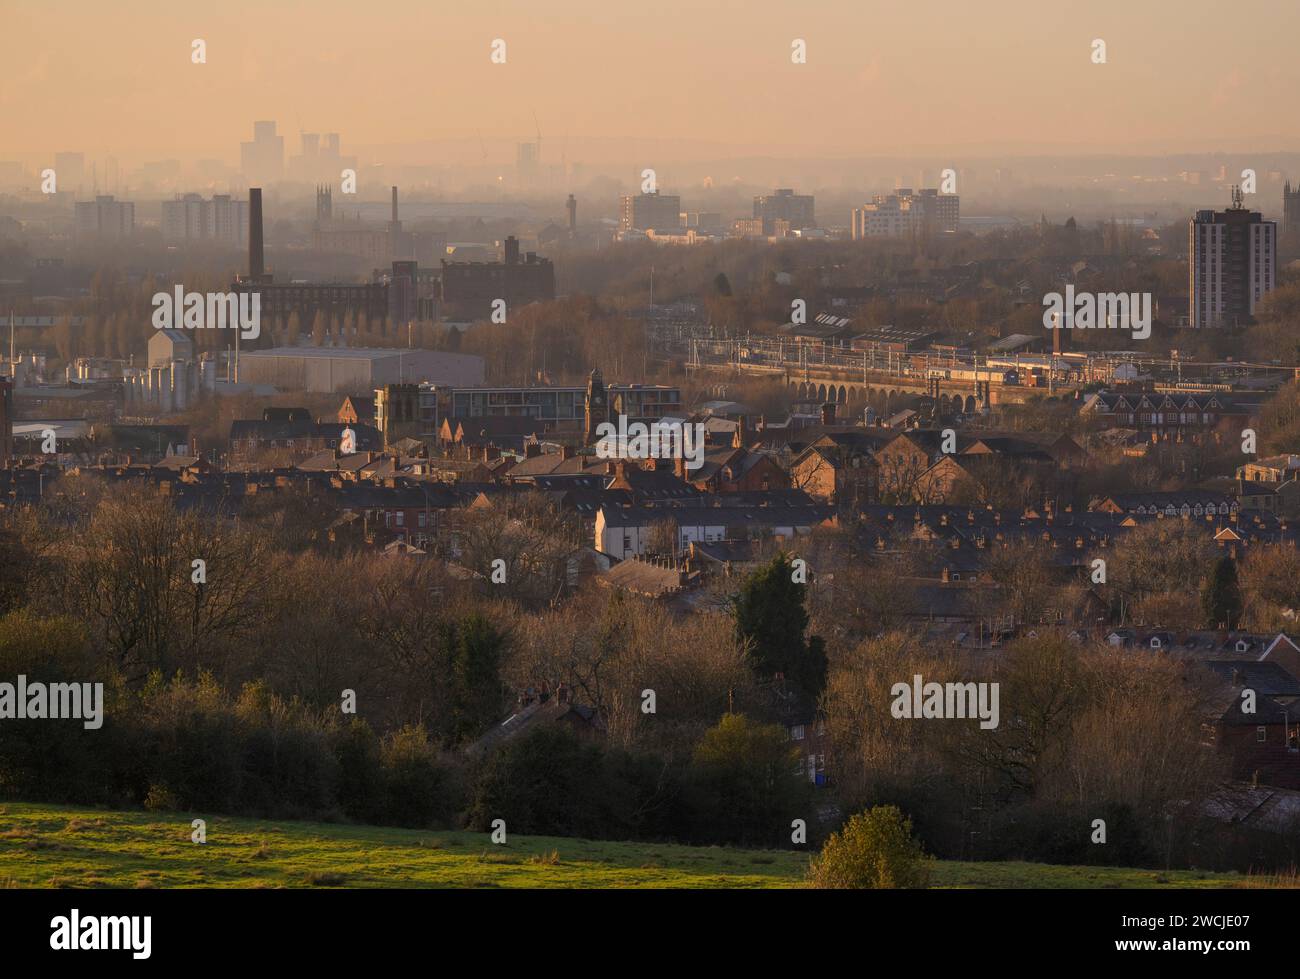 General view of factories and residential housing with the Manchester skyline in the distance Stock Photo